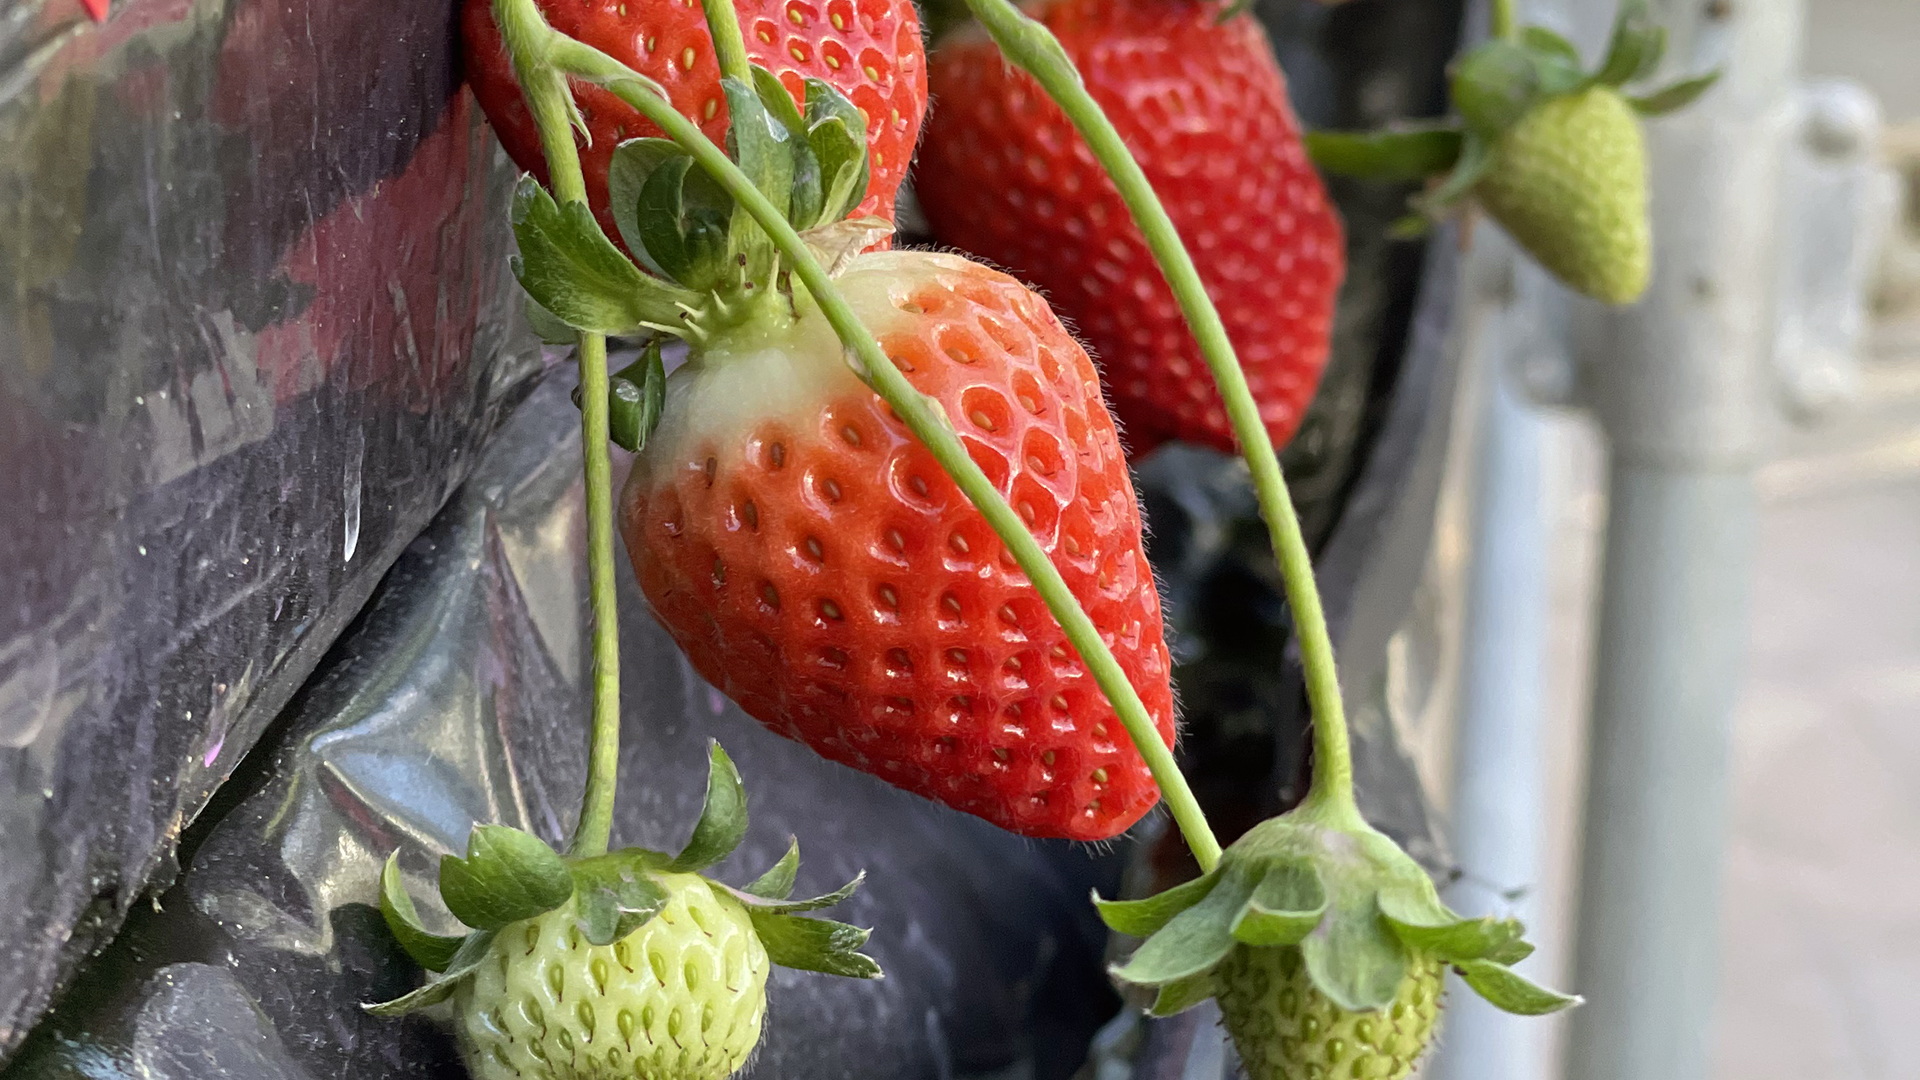 A-Hydroponic-System-Smart-Strawberry-Production-close-up-view-3